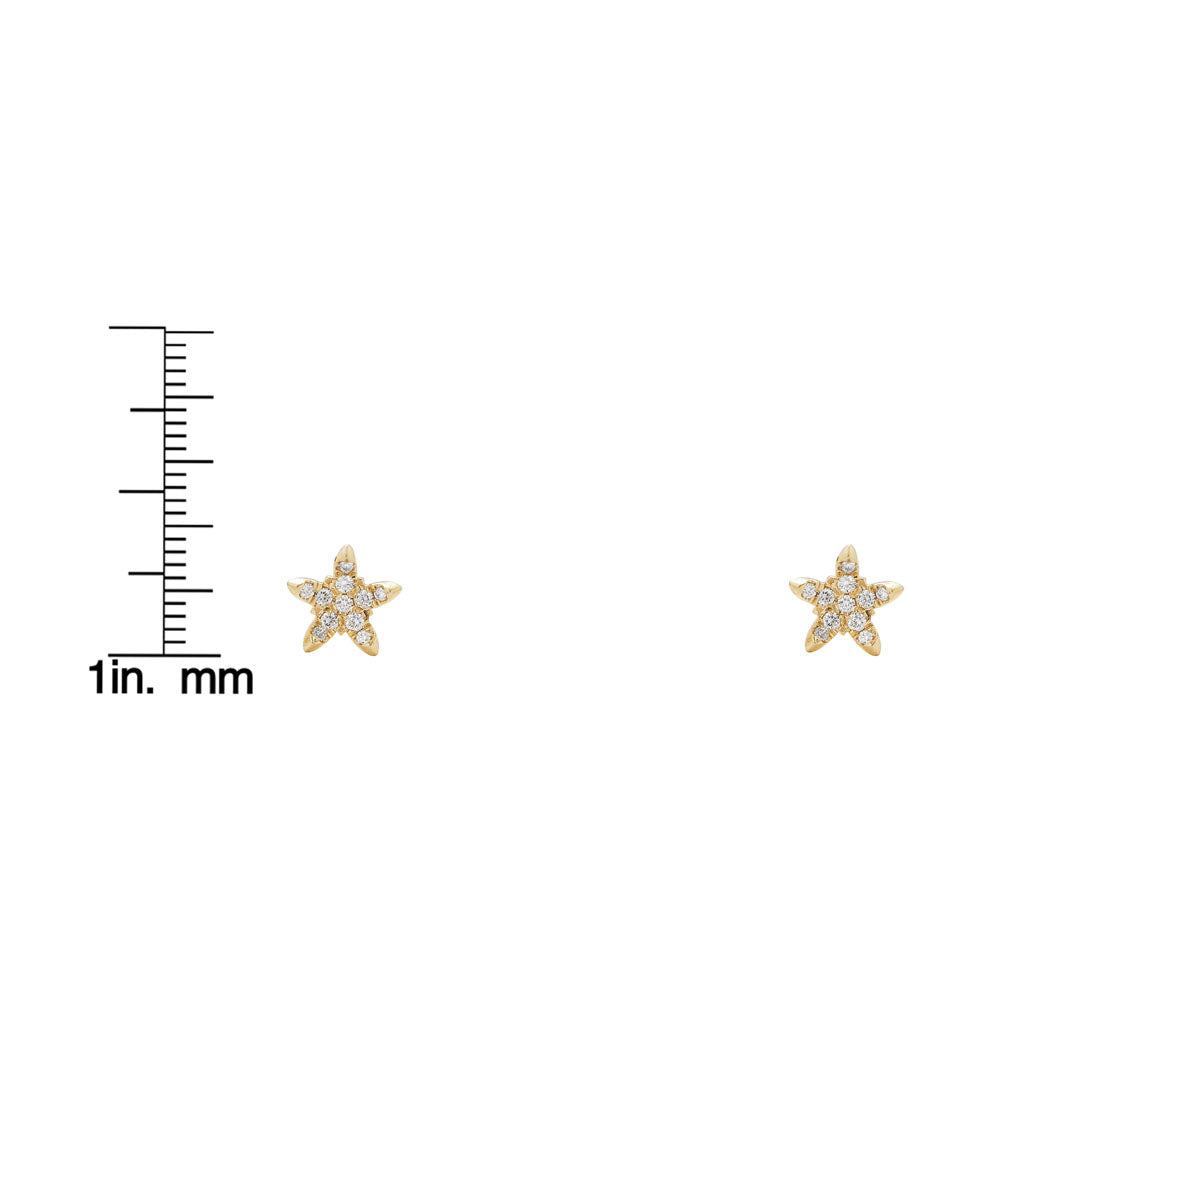 curved diamond star earrings scale measurement